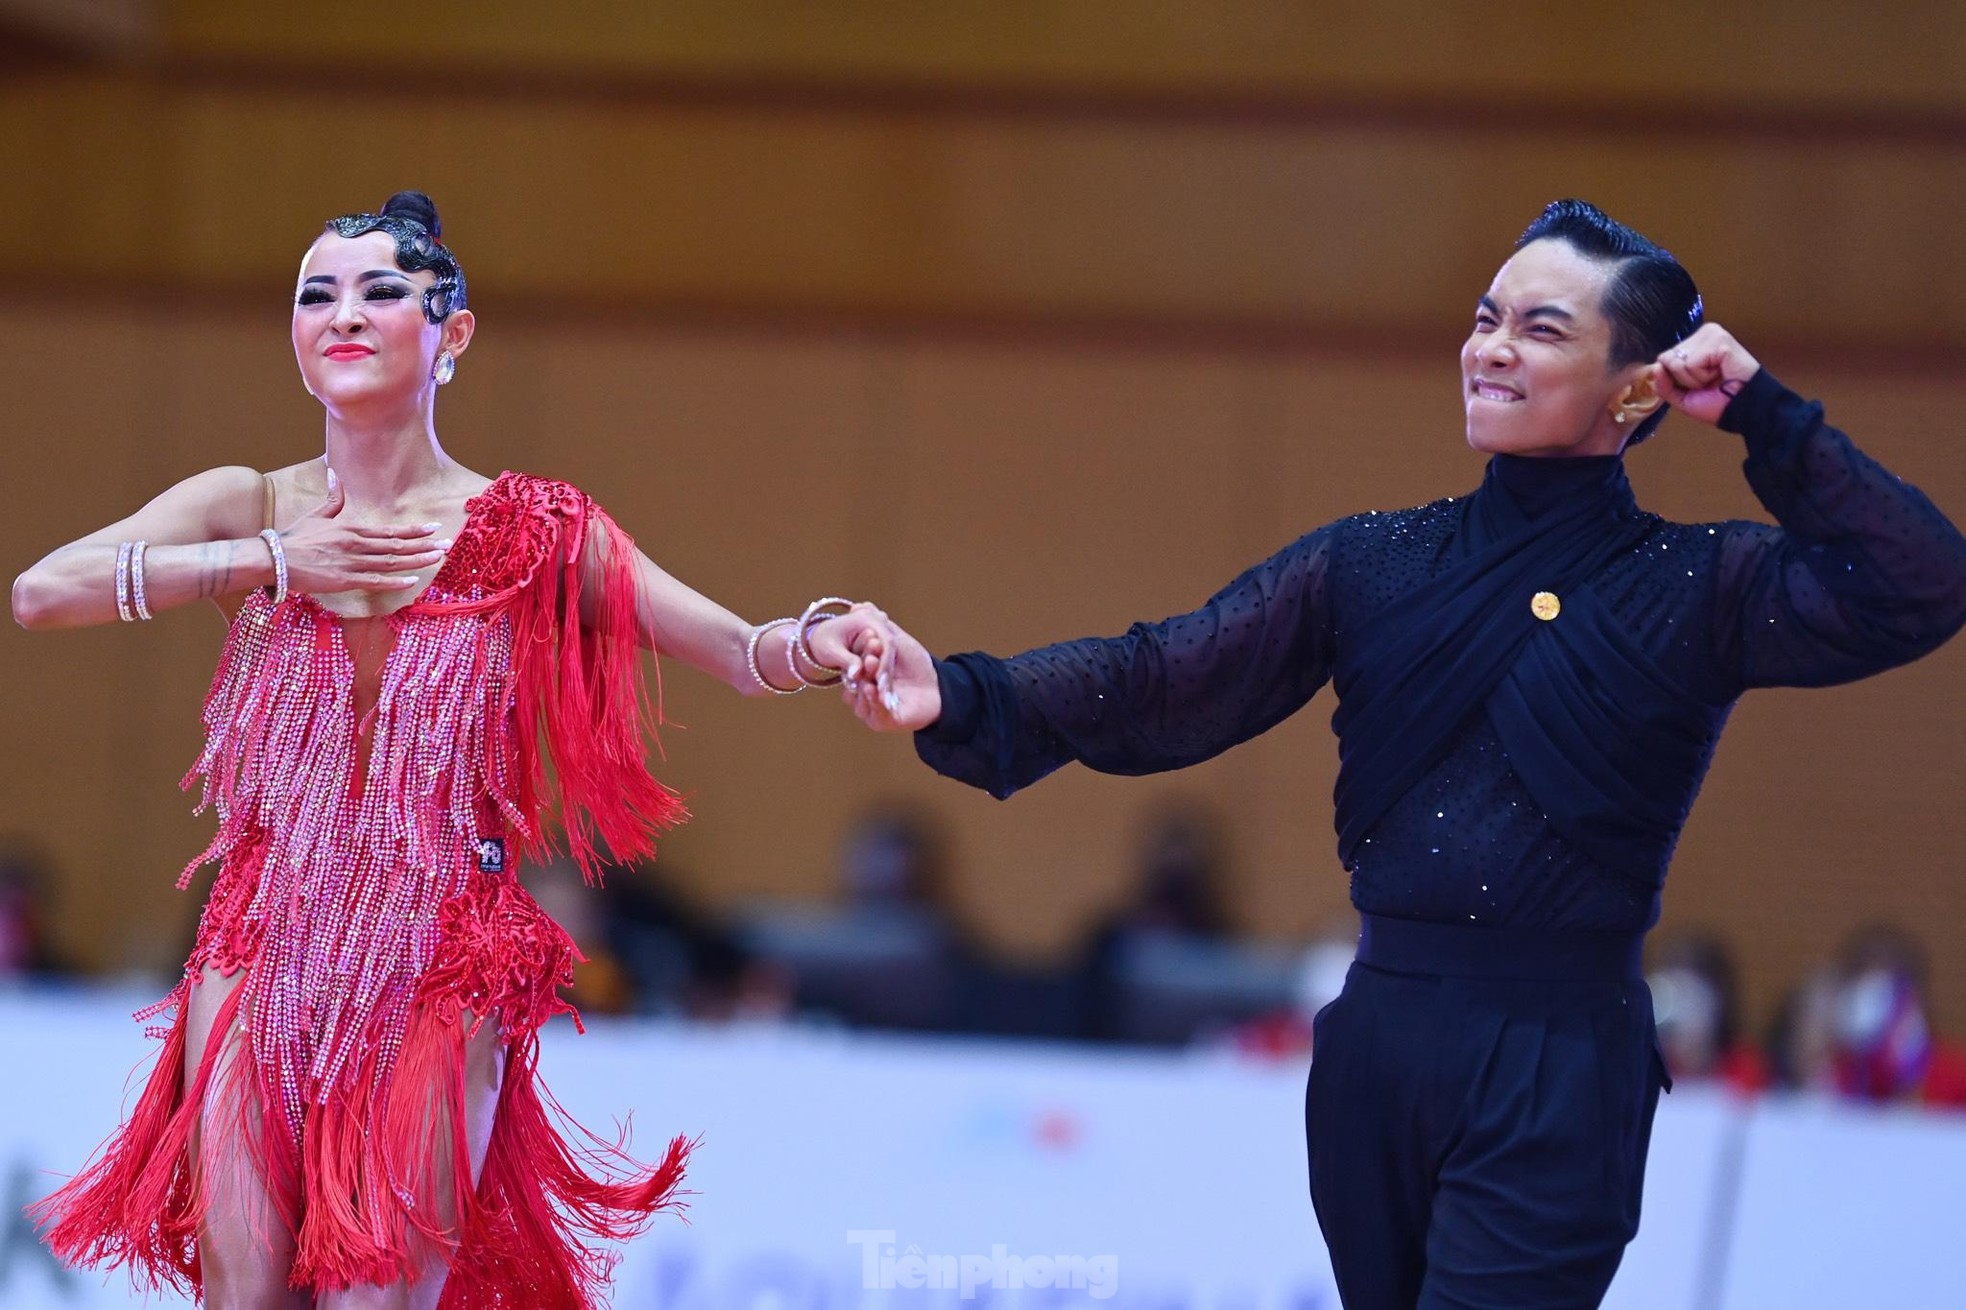 Watch the mesmerizing dance that helped Dancesport Vietnam win 5 gold medals at the 31st SEA Games - Photo 12.